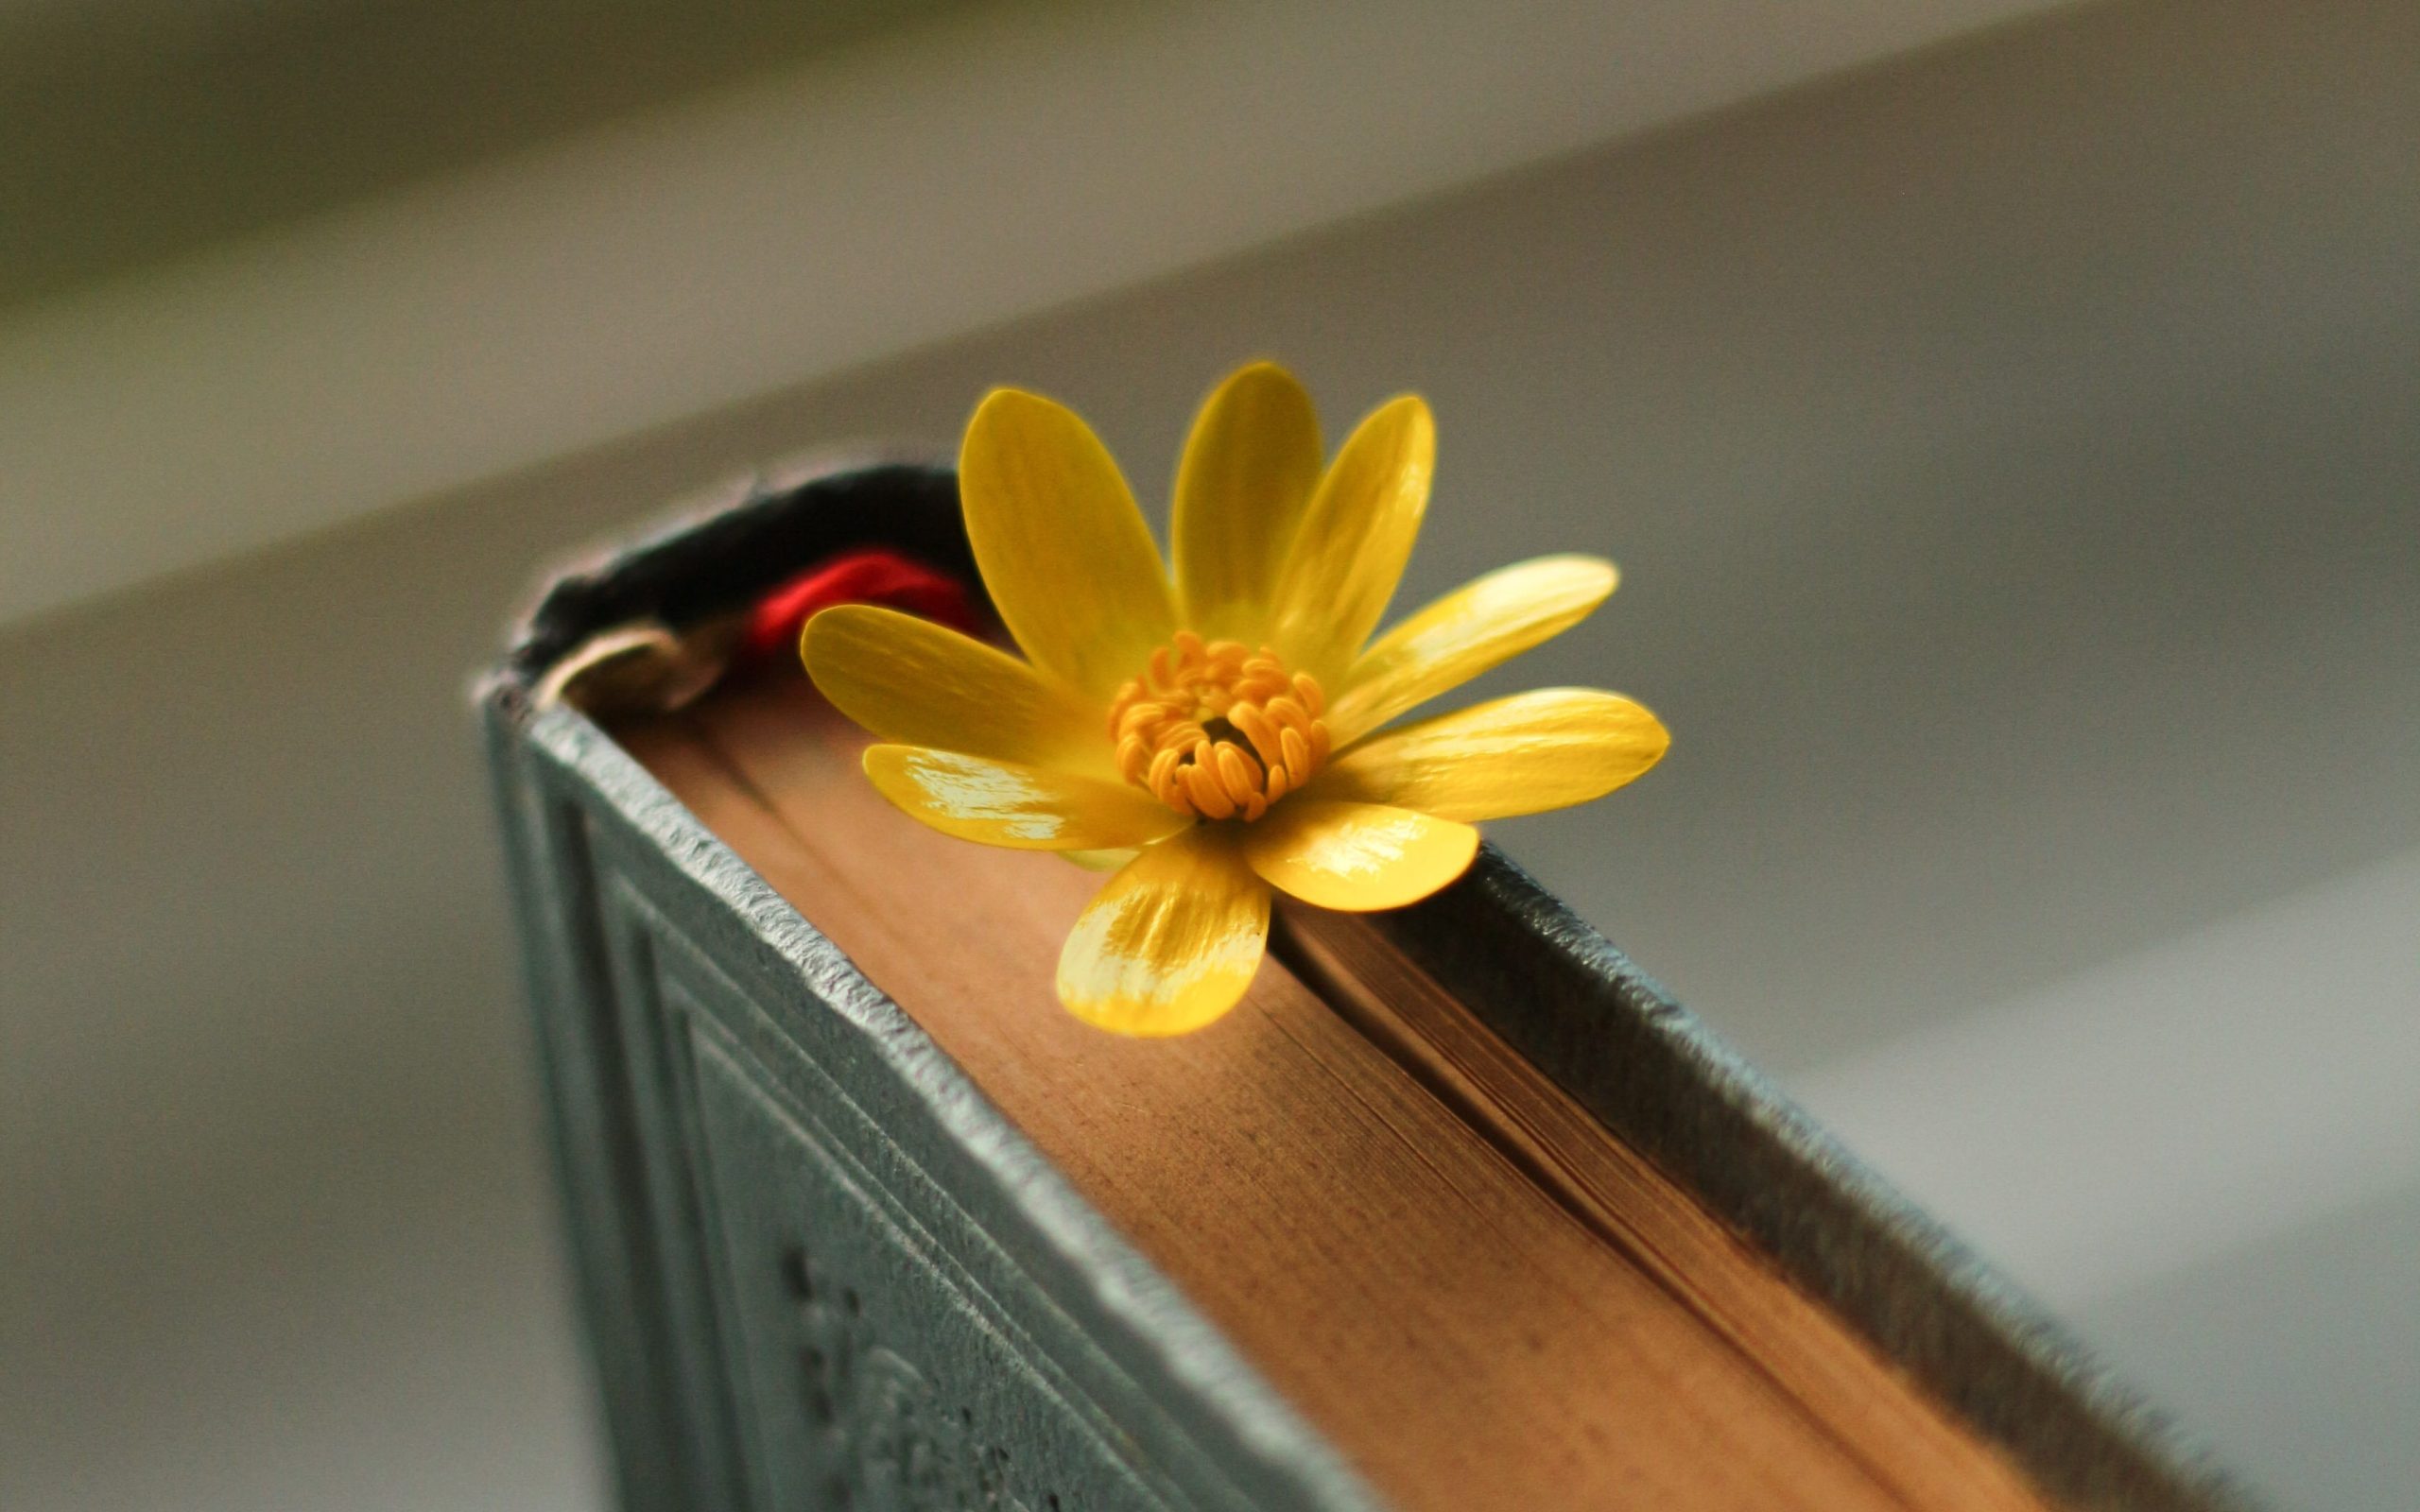 An image of a flower stuck between the pages of a closed book.